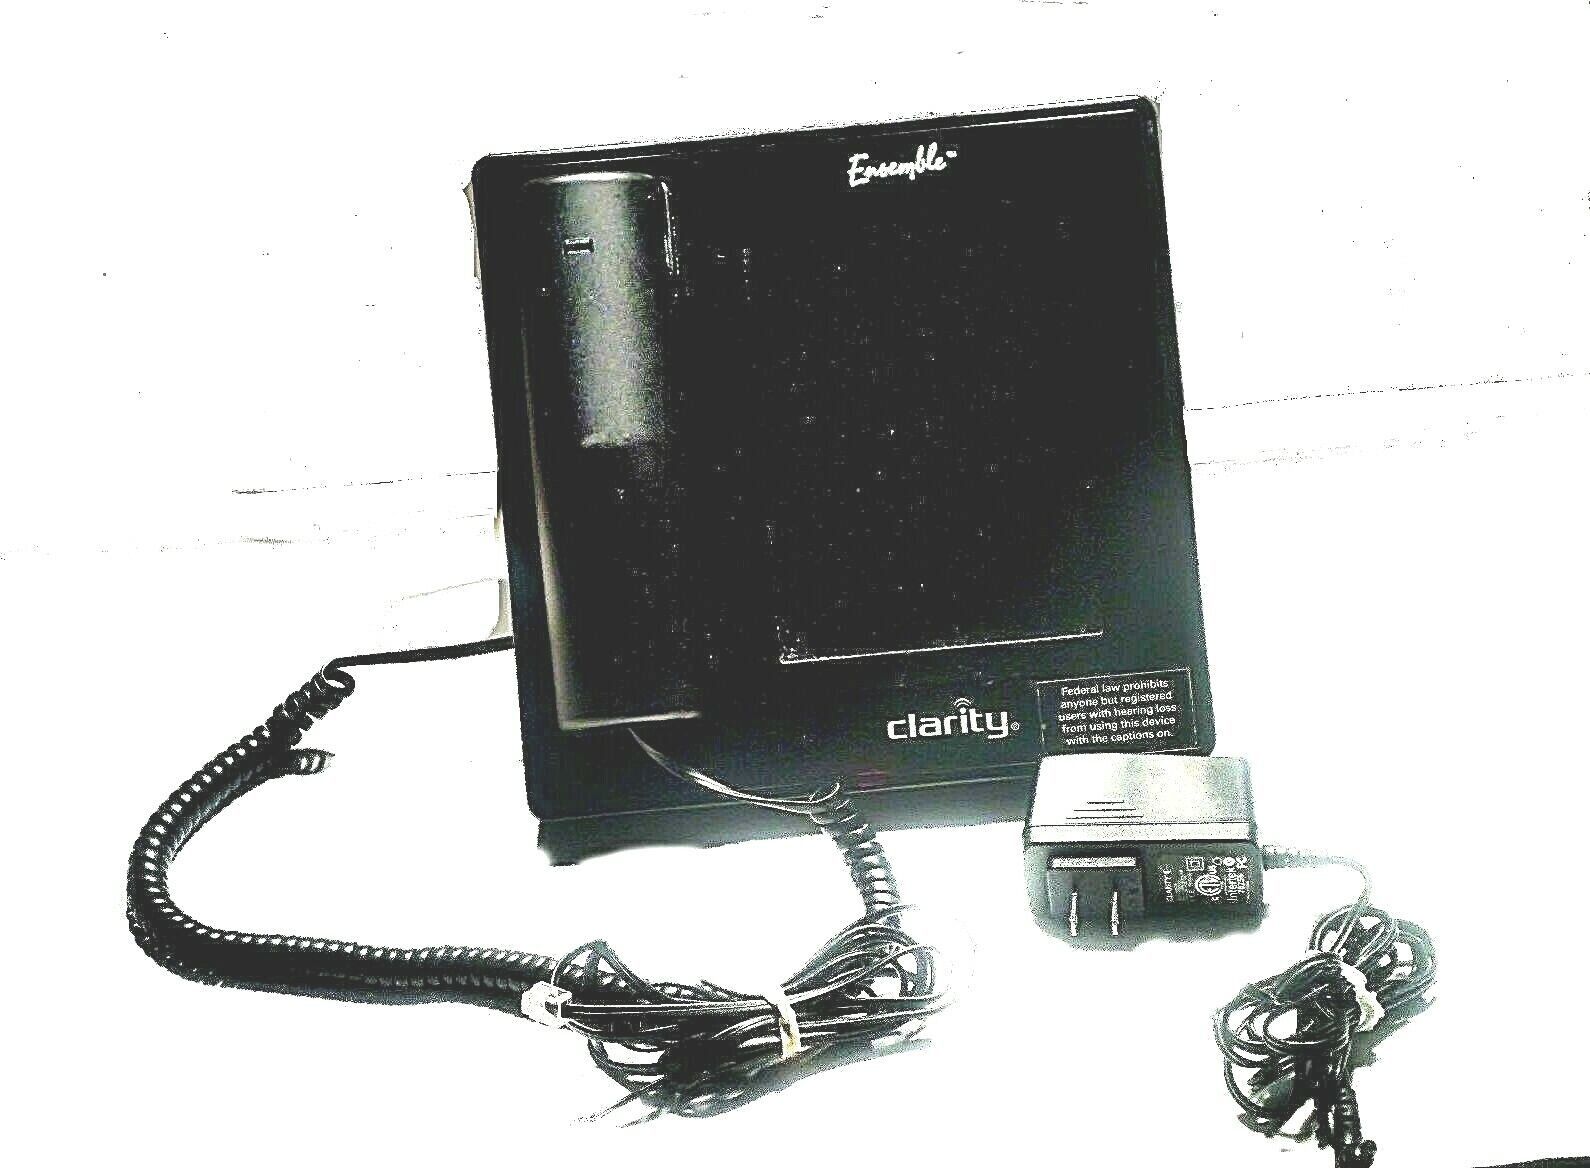 Clarity Ensemble Digital Touch Screen Severe Hearing Loss Amplified Corded Phone - $42.51